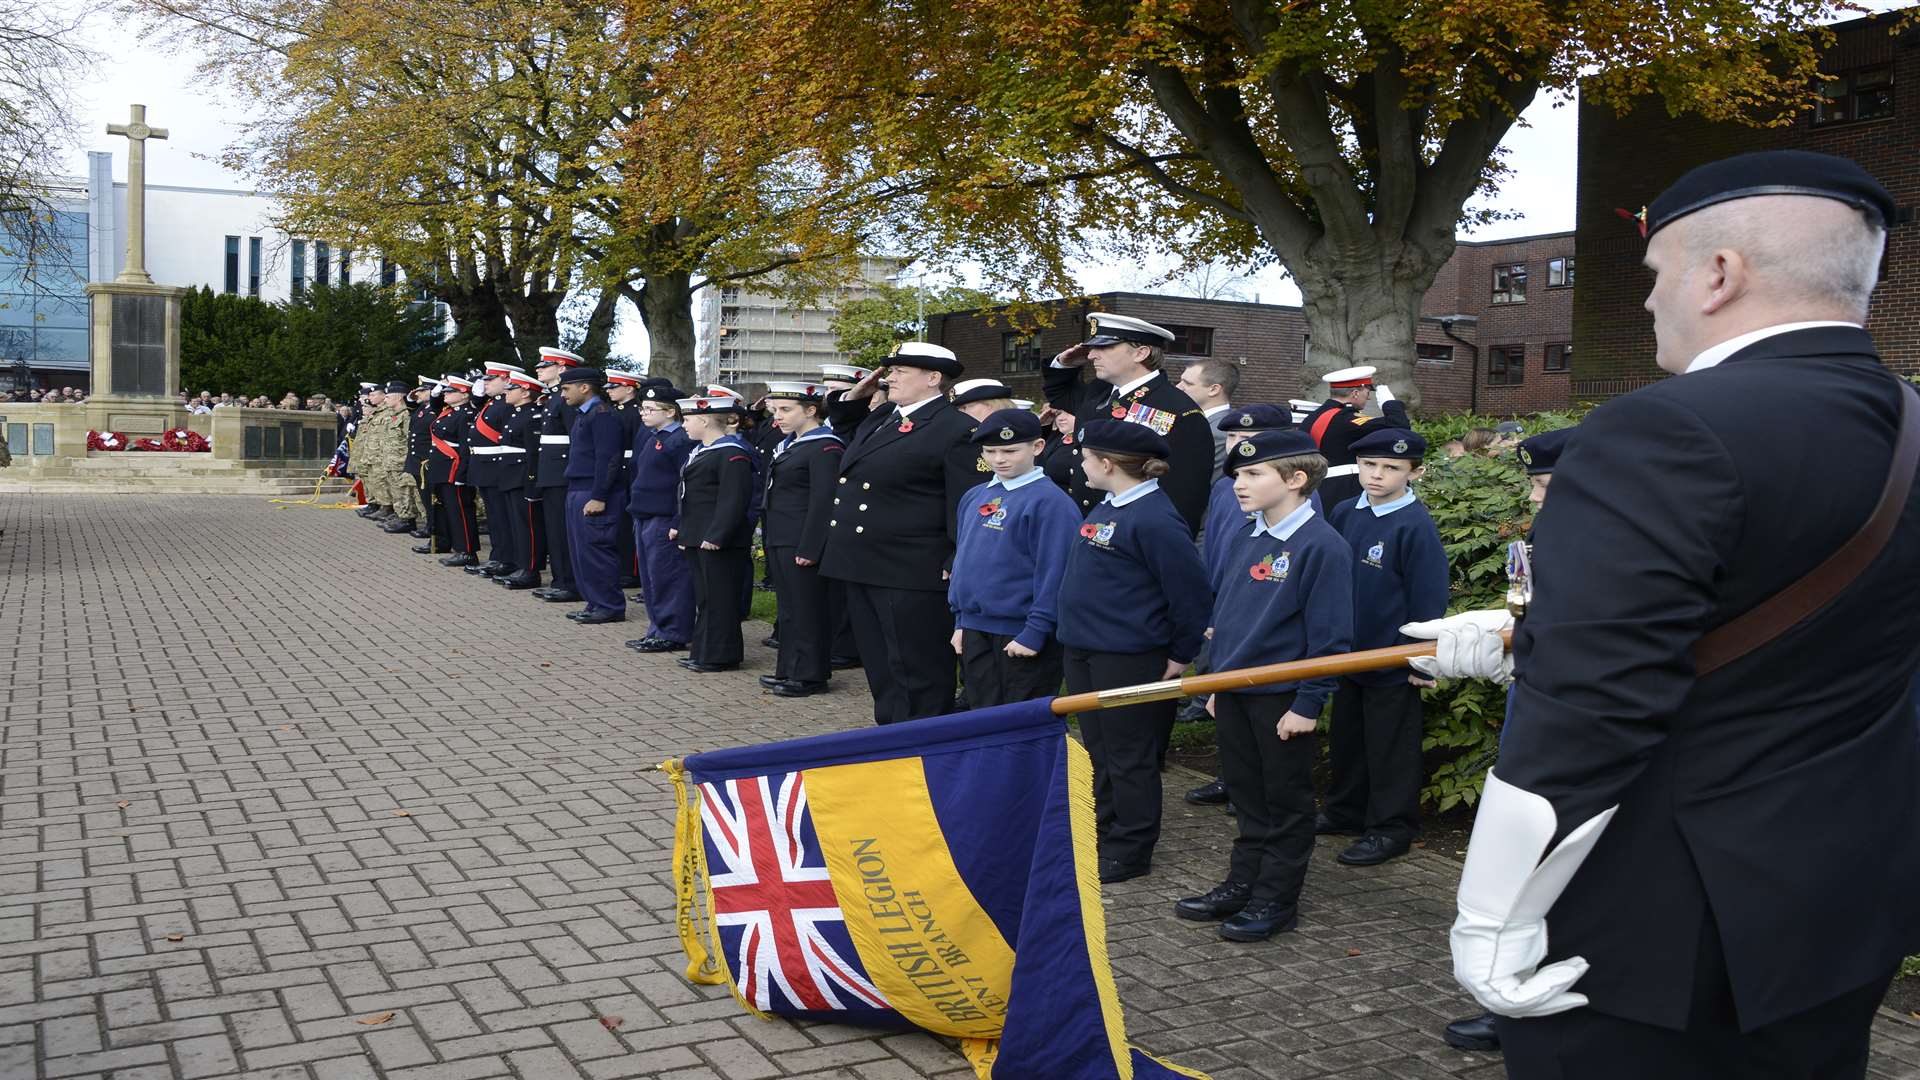 Remembrance Sunday at the War Memorial in Church Road.